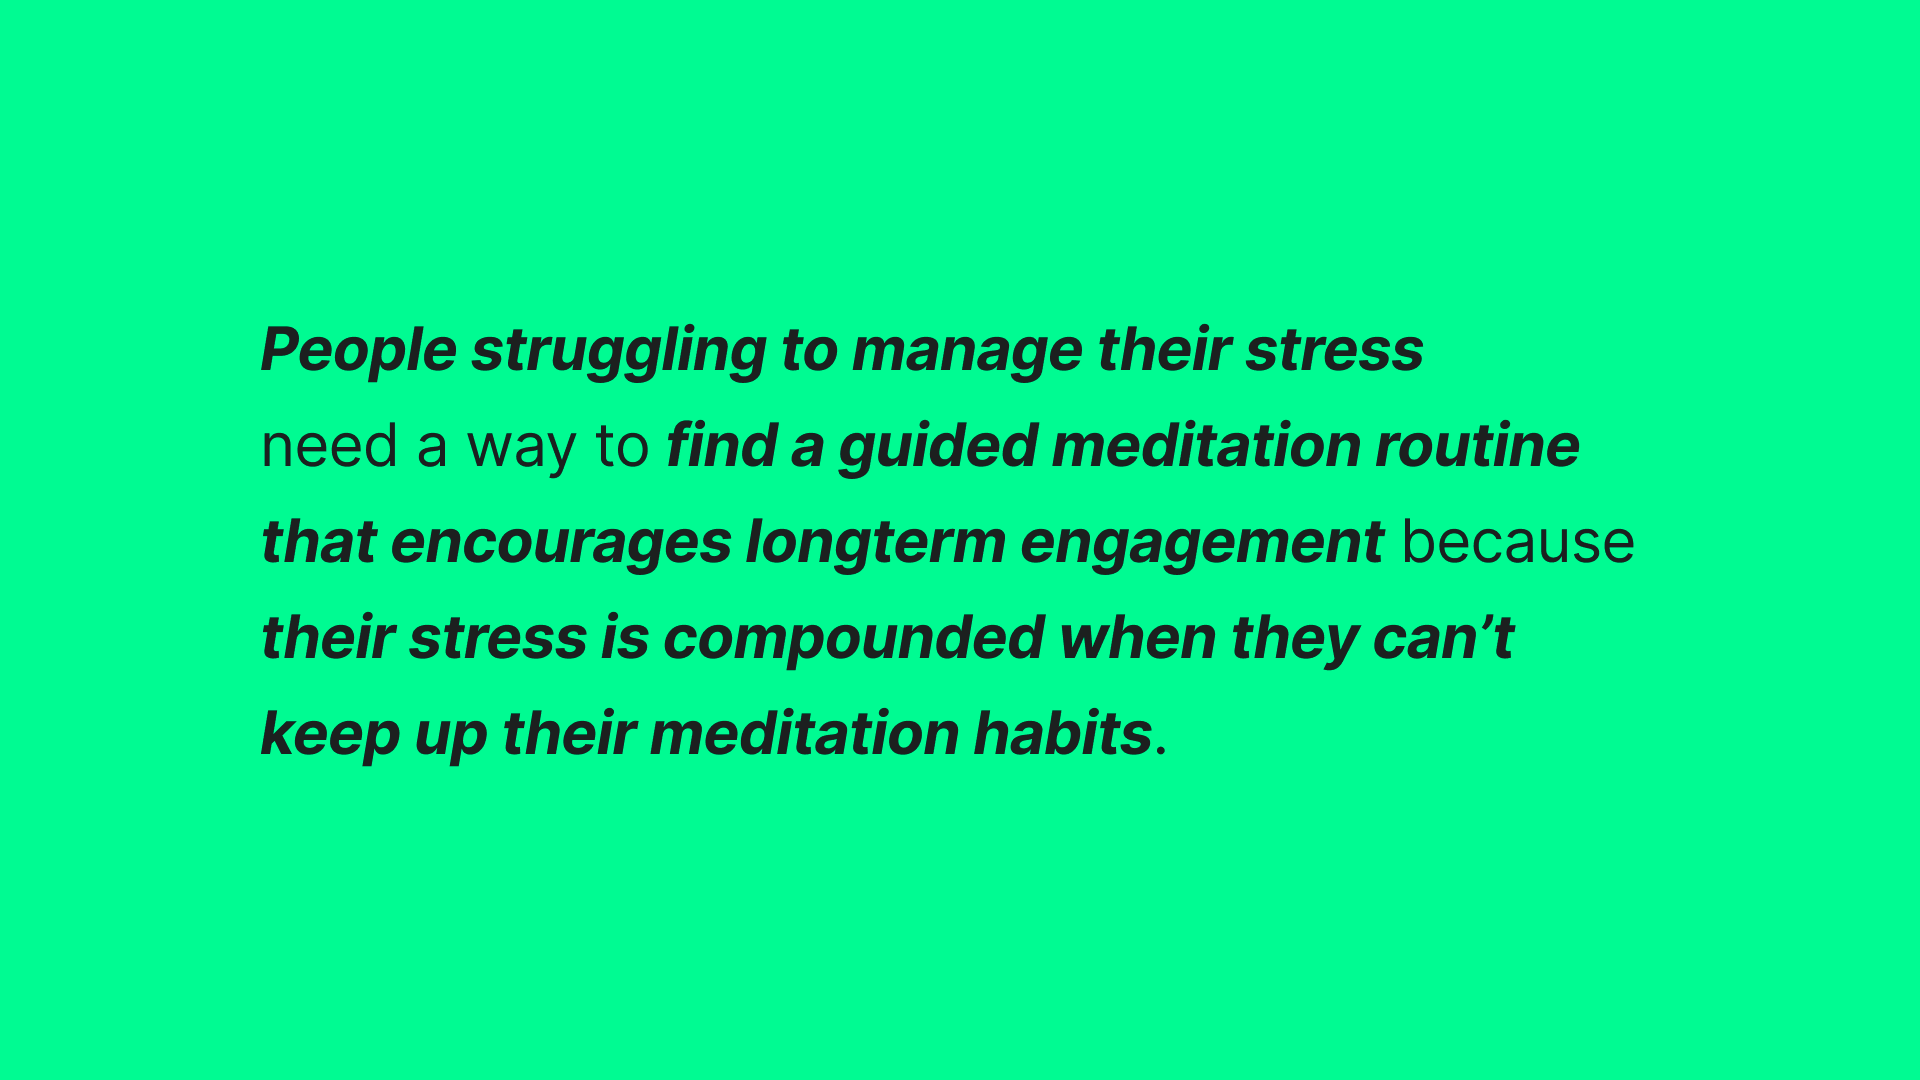 People struggling to manage their stress need a way to find a guided meditation routine that encourages long-term engagement because their stress is compounded when they can’t keep up their meditation habits.